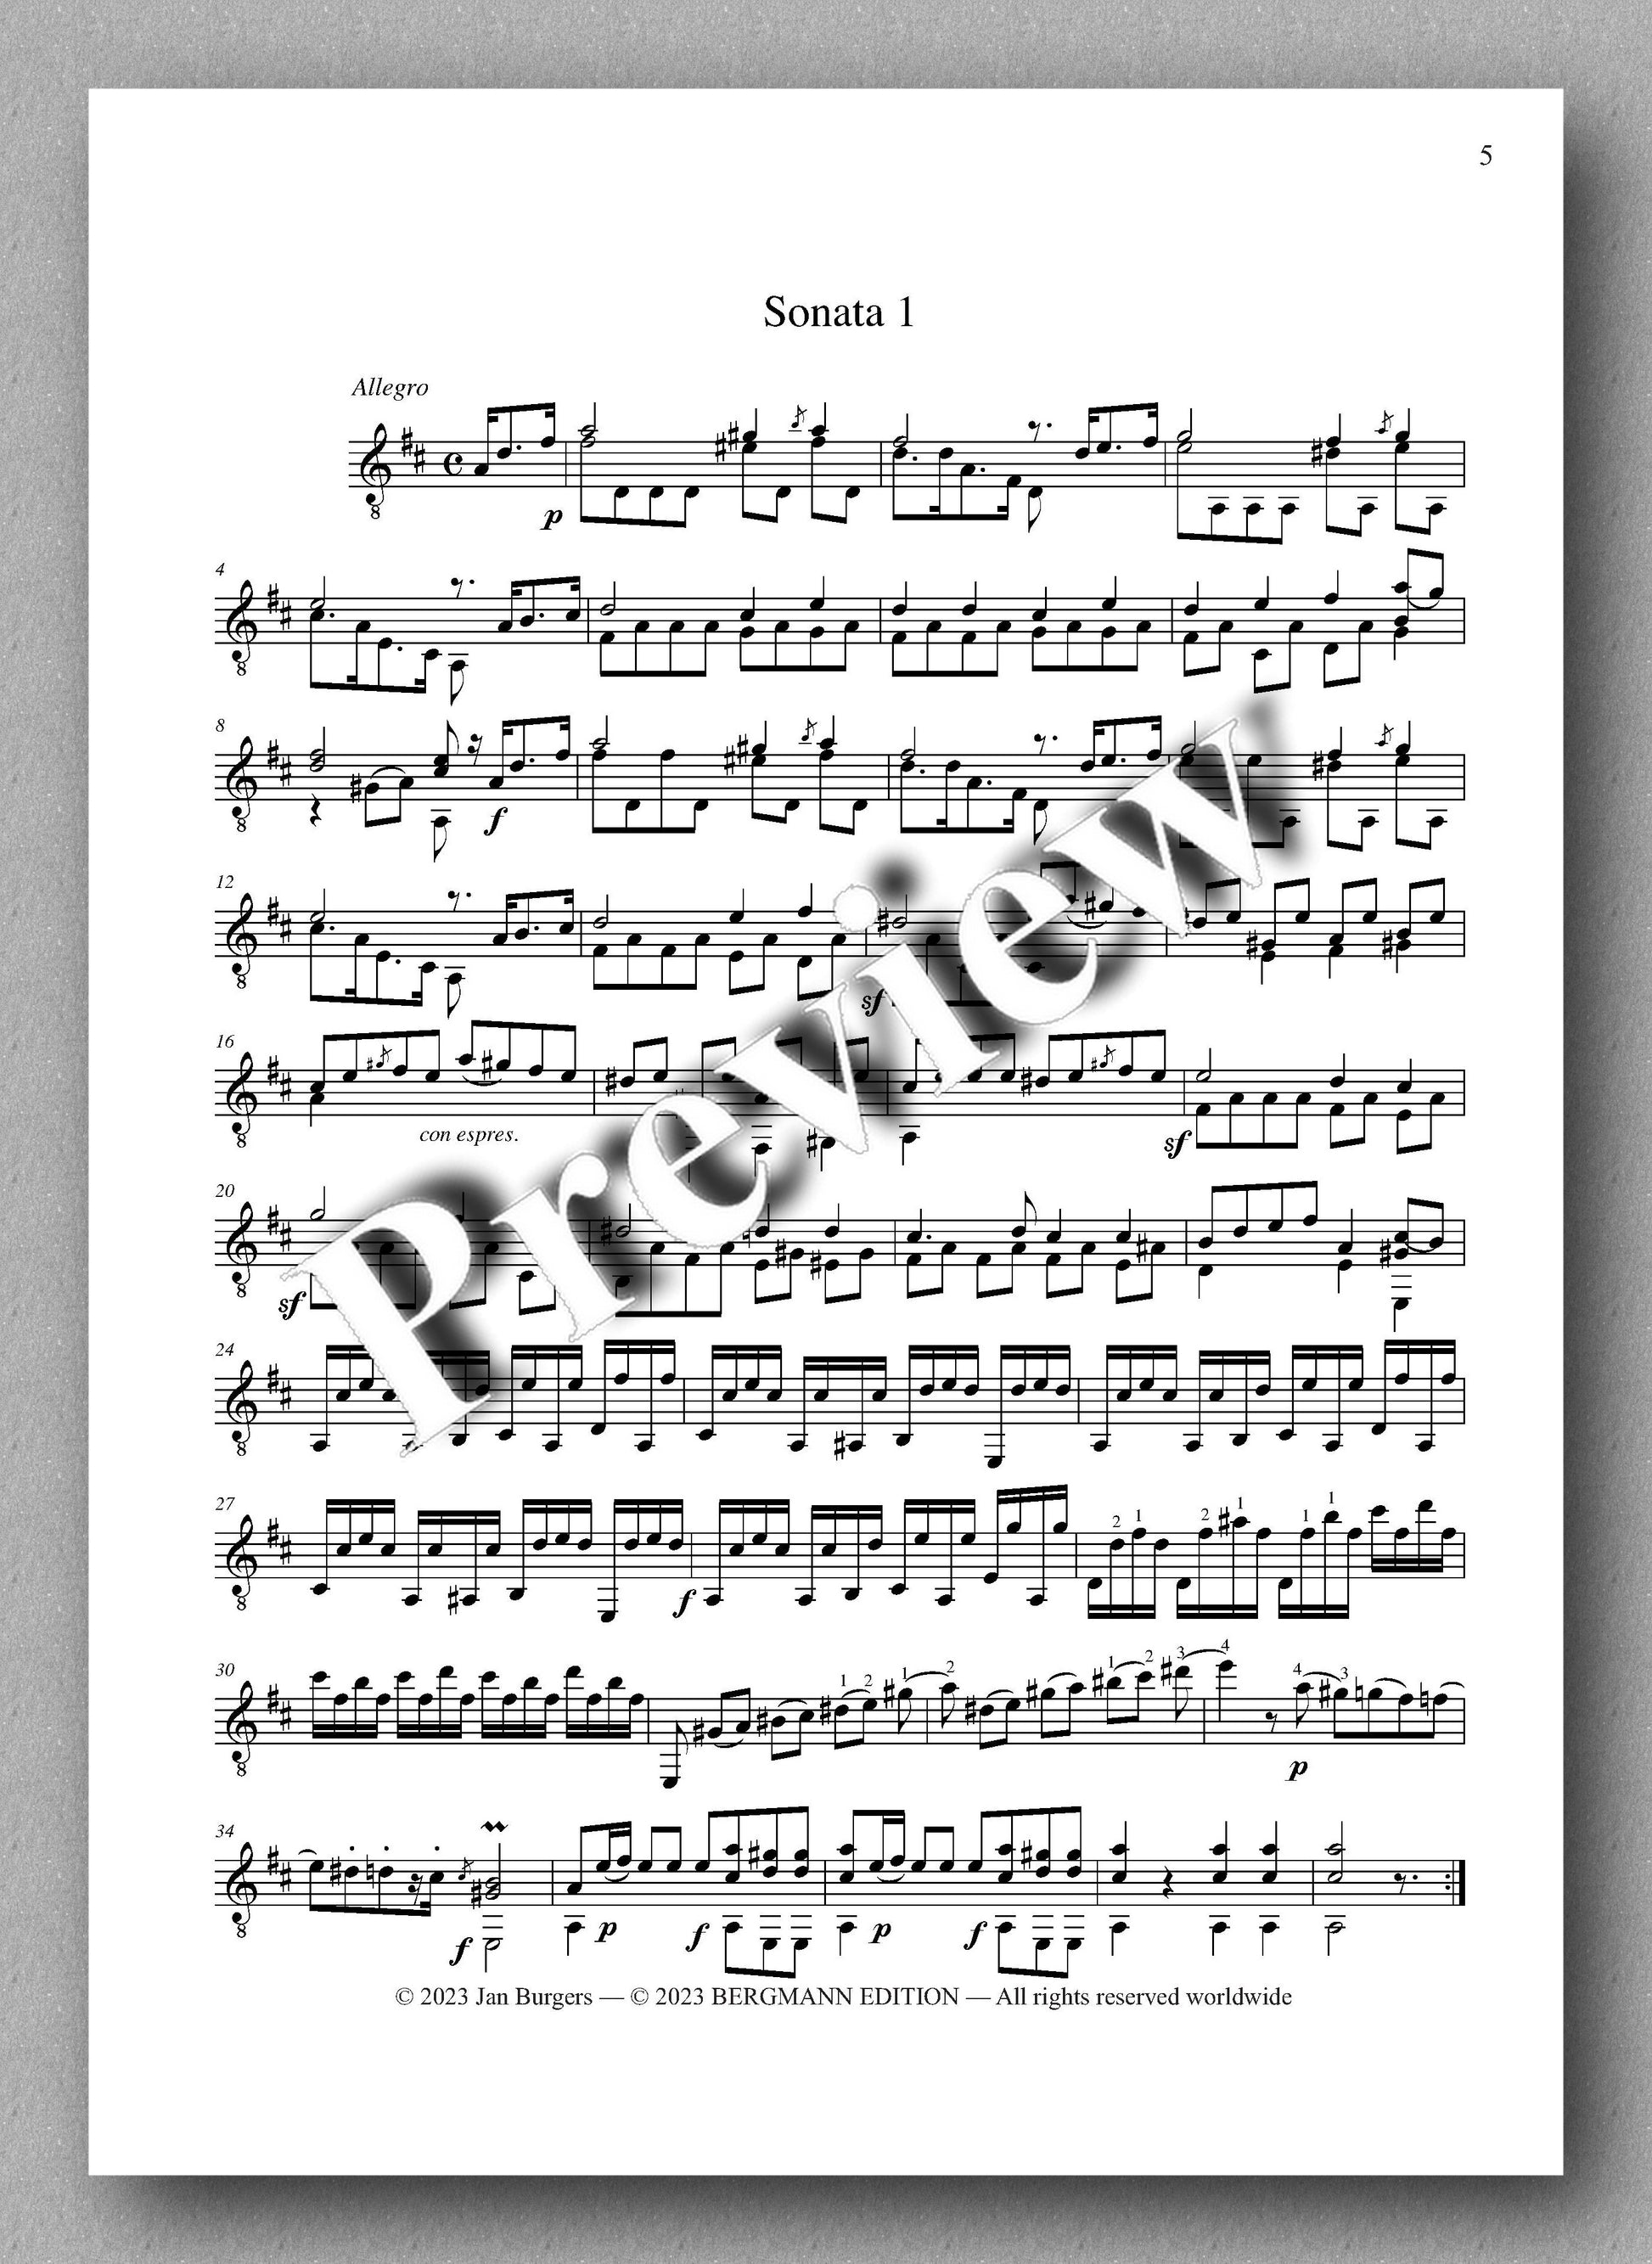 Molino, Collected Works for Guitar Solo, Vol. 4 - preview of the music score 1